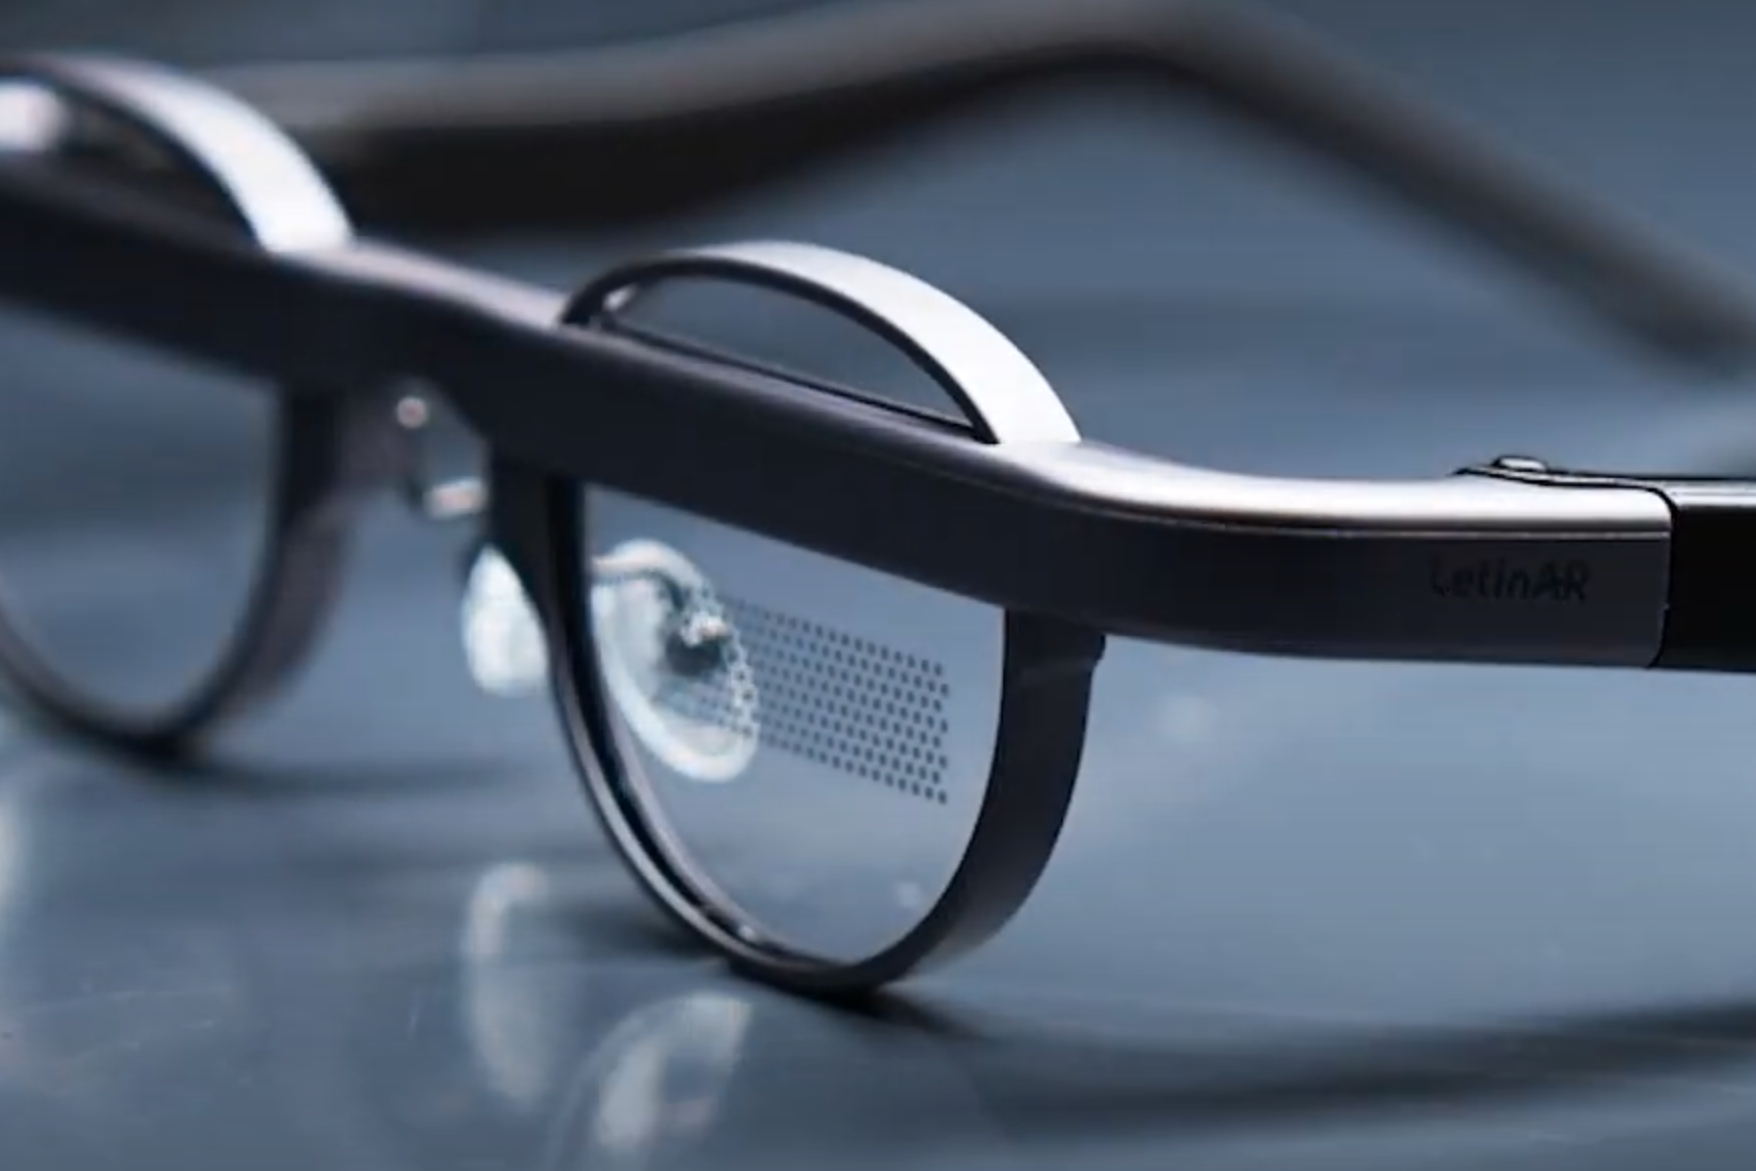 These AR glasses have a proprietary optic engine & hi-fi color accuracy